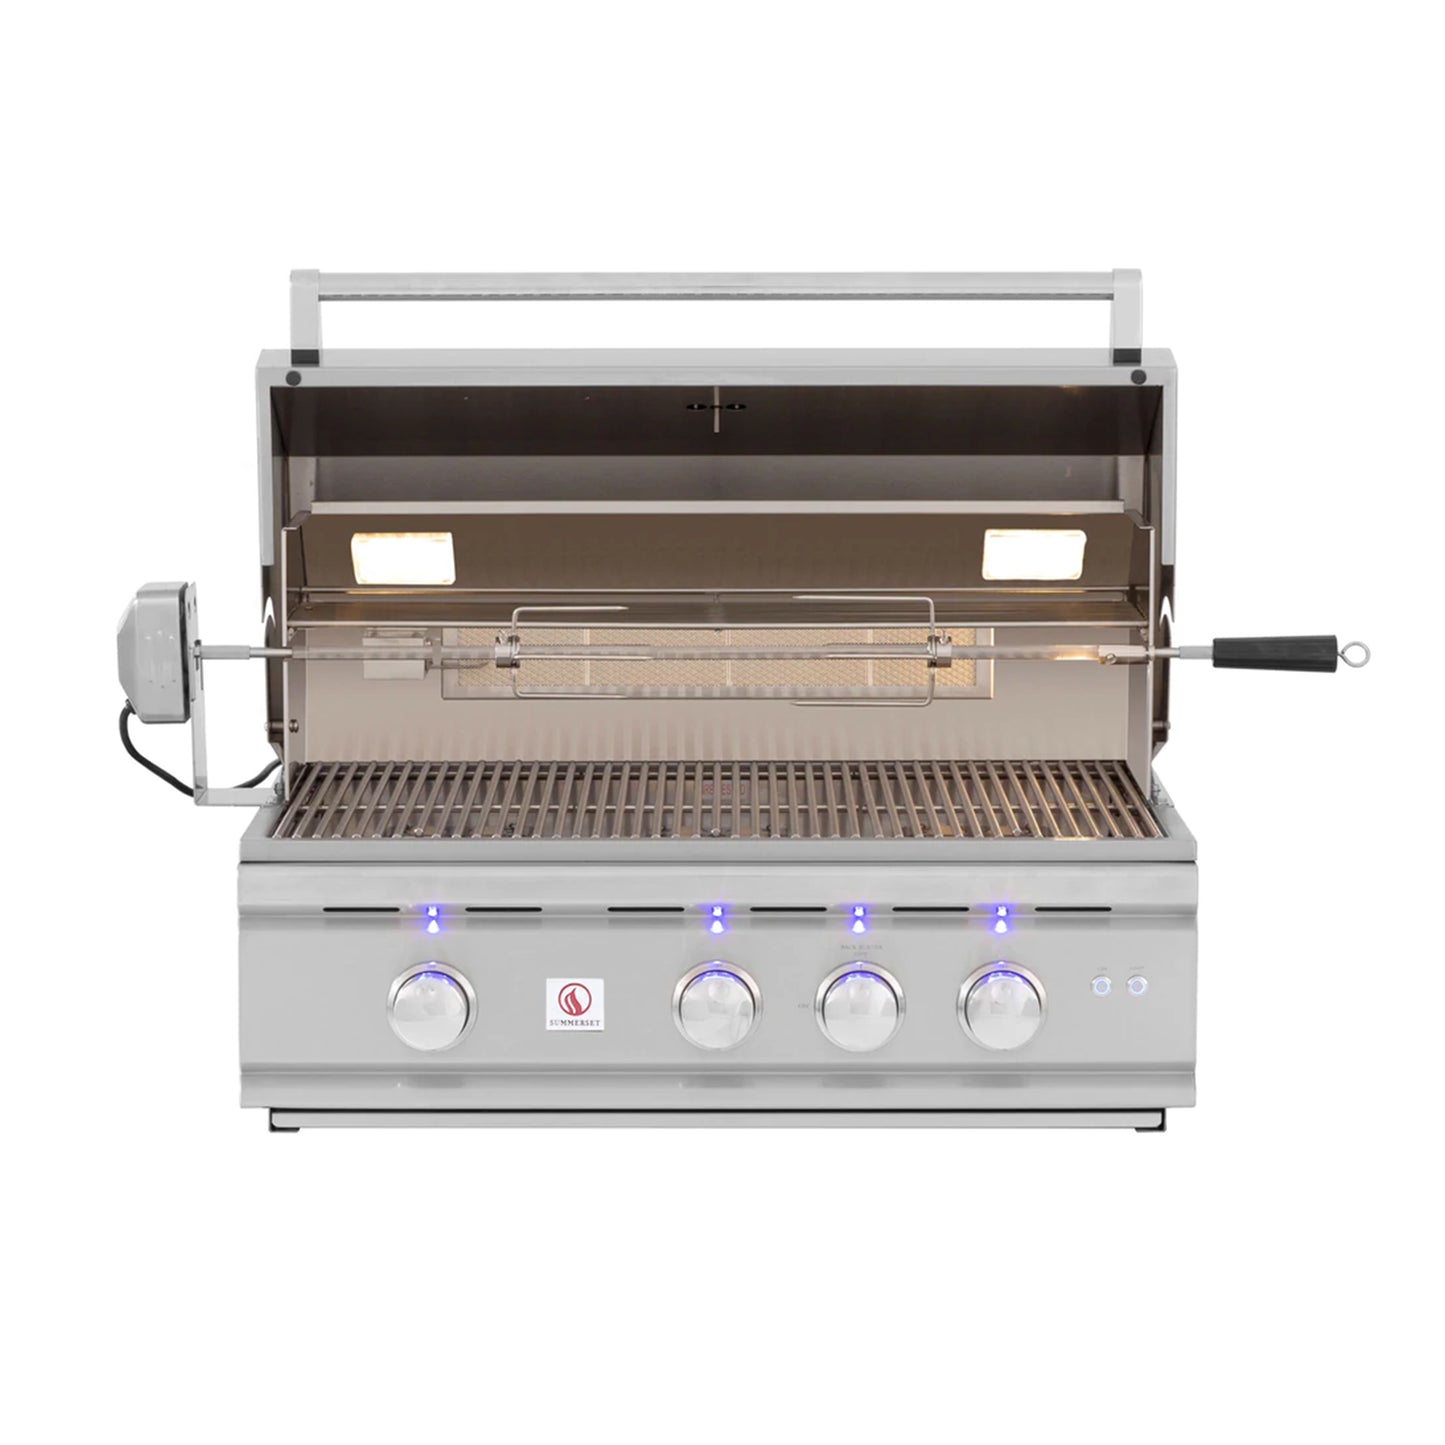 Summerset TRL 32-Inch Built-in Gas Grill